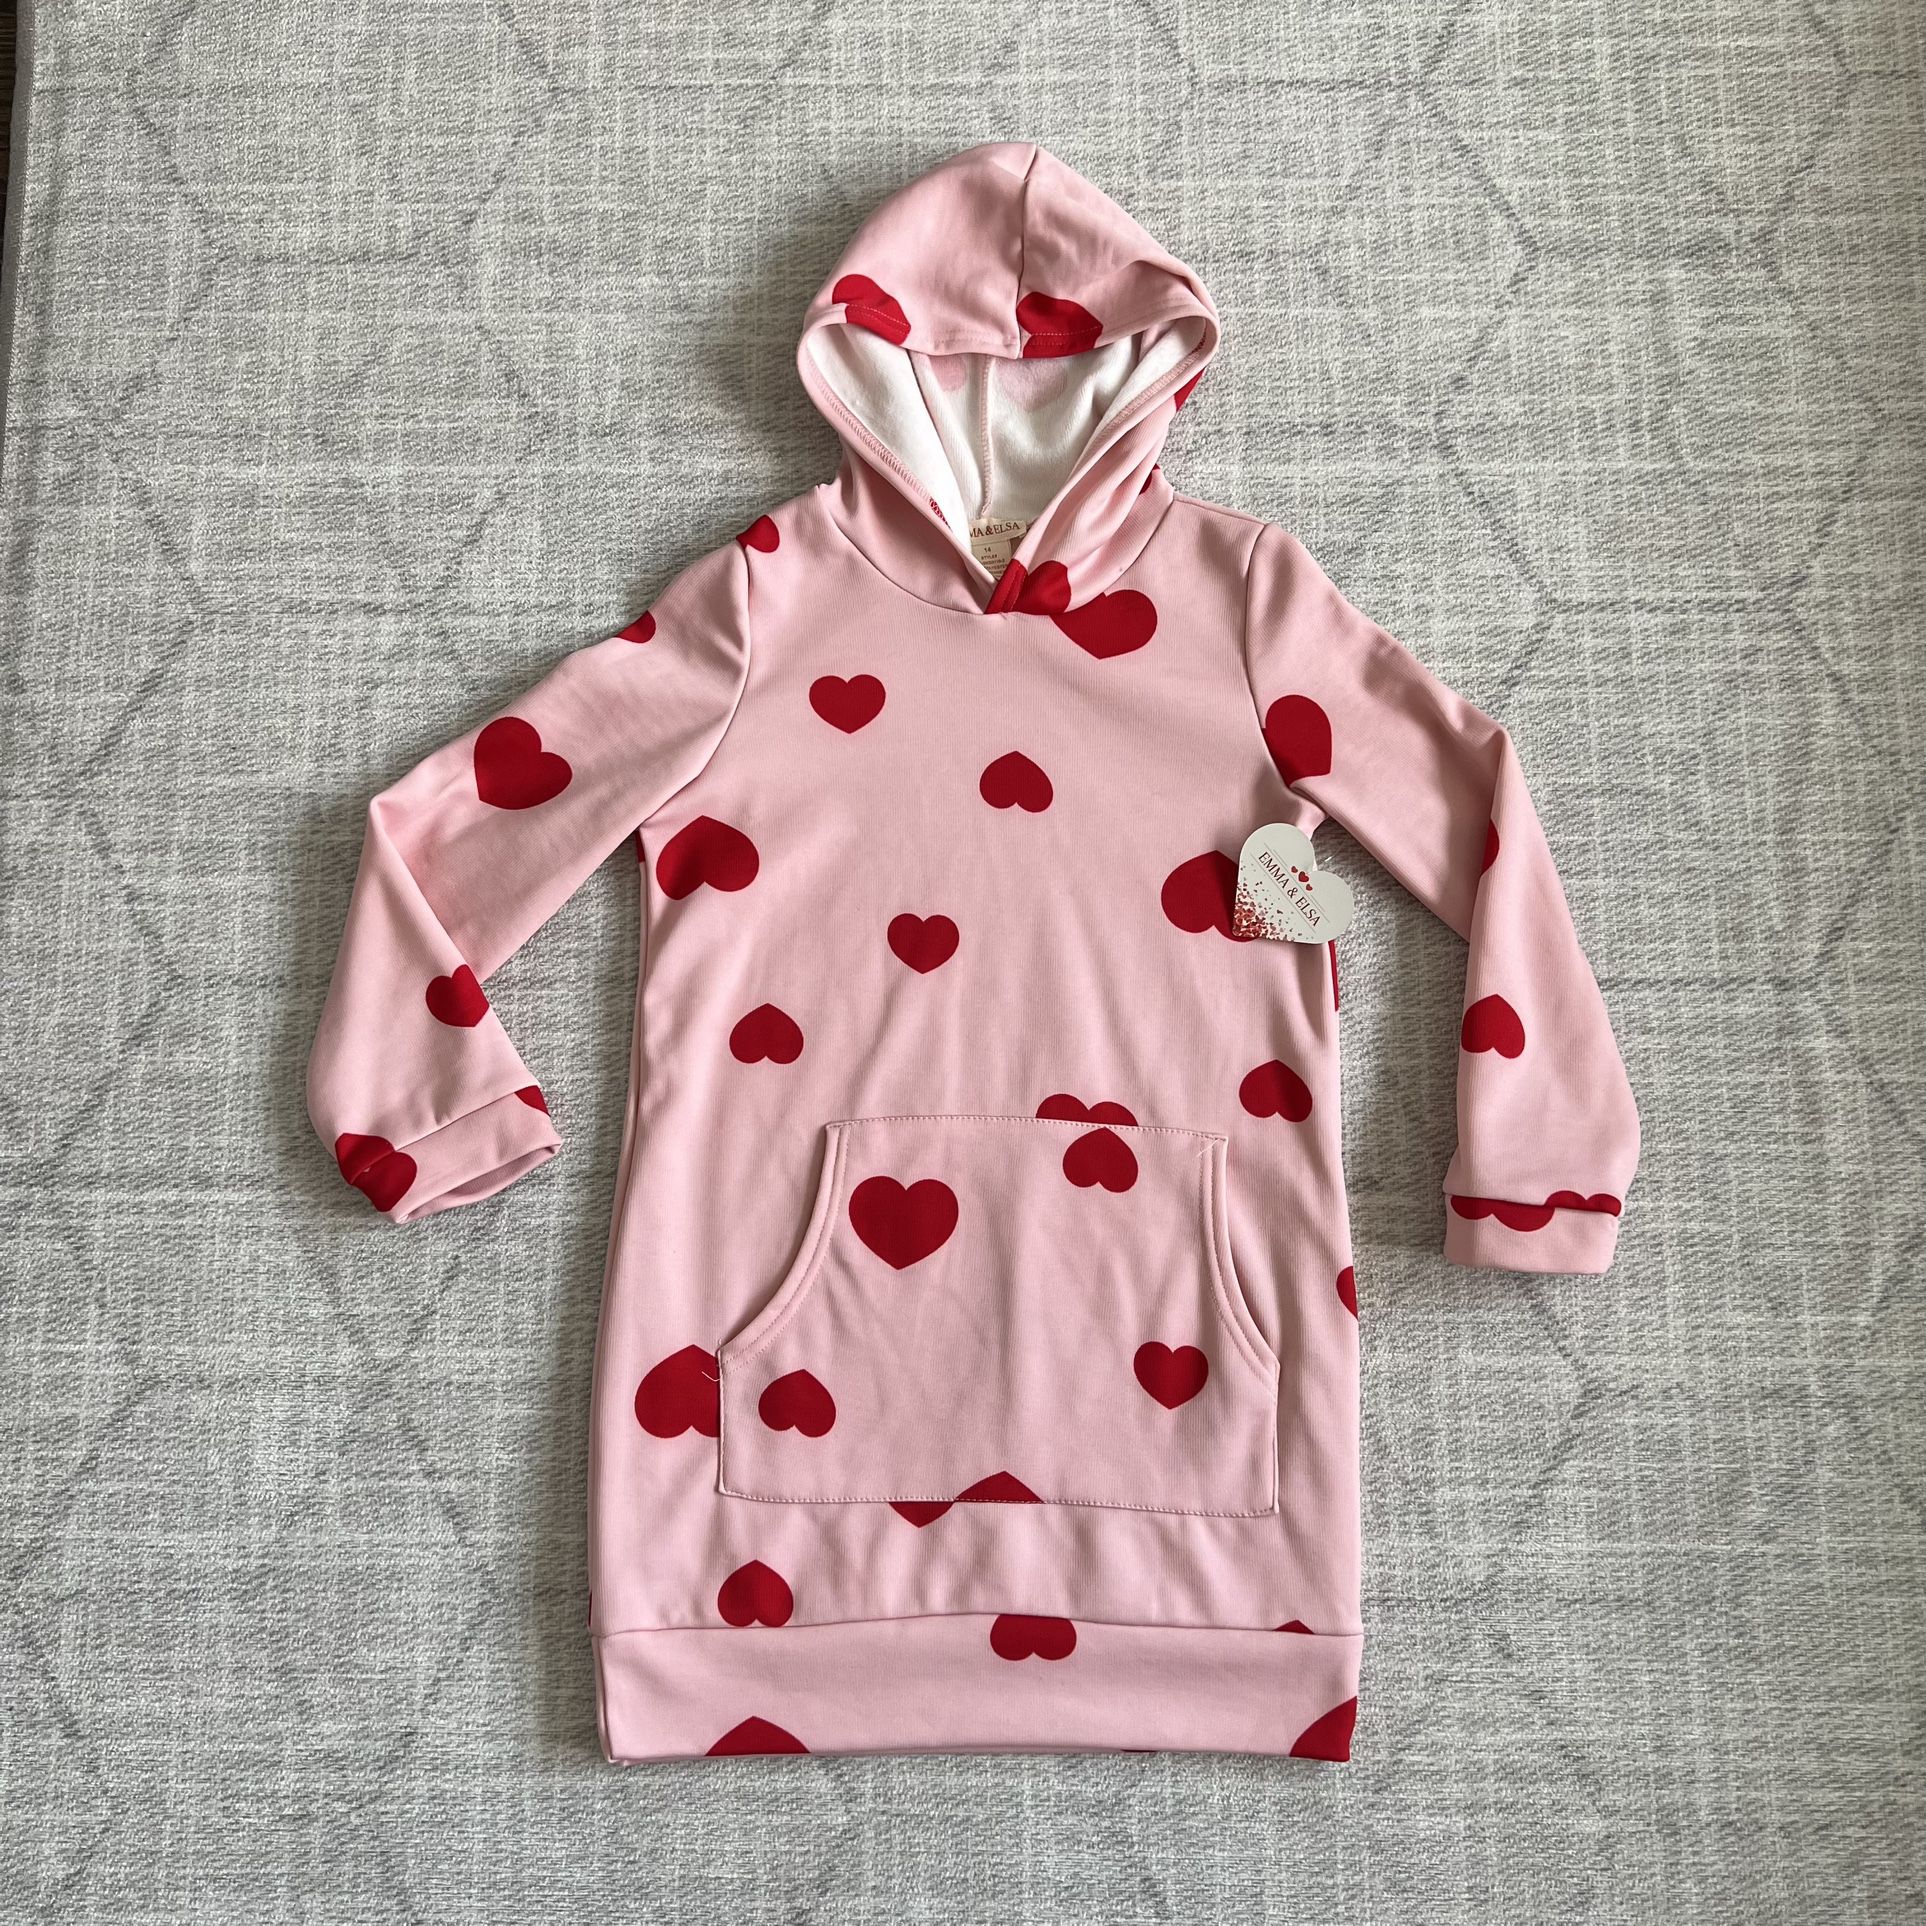 Emma & Elsa Girl’s Youth Red Hearts Pink Oversized Pajamas Hoodie Pullover